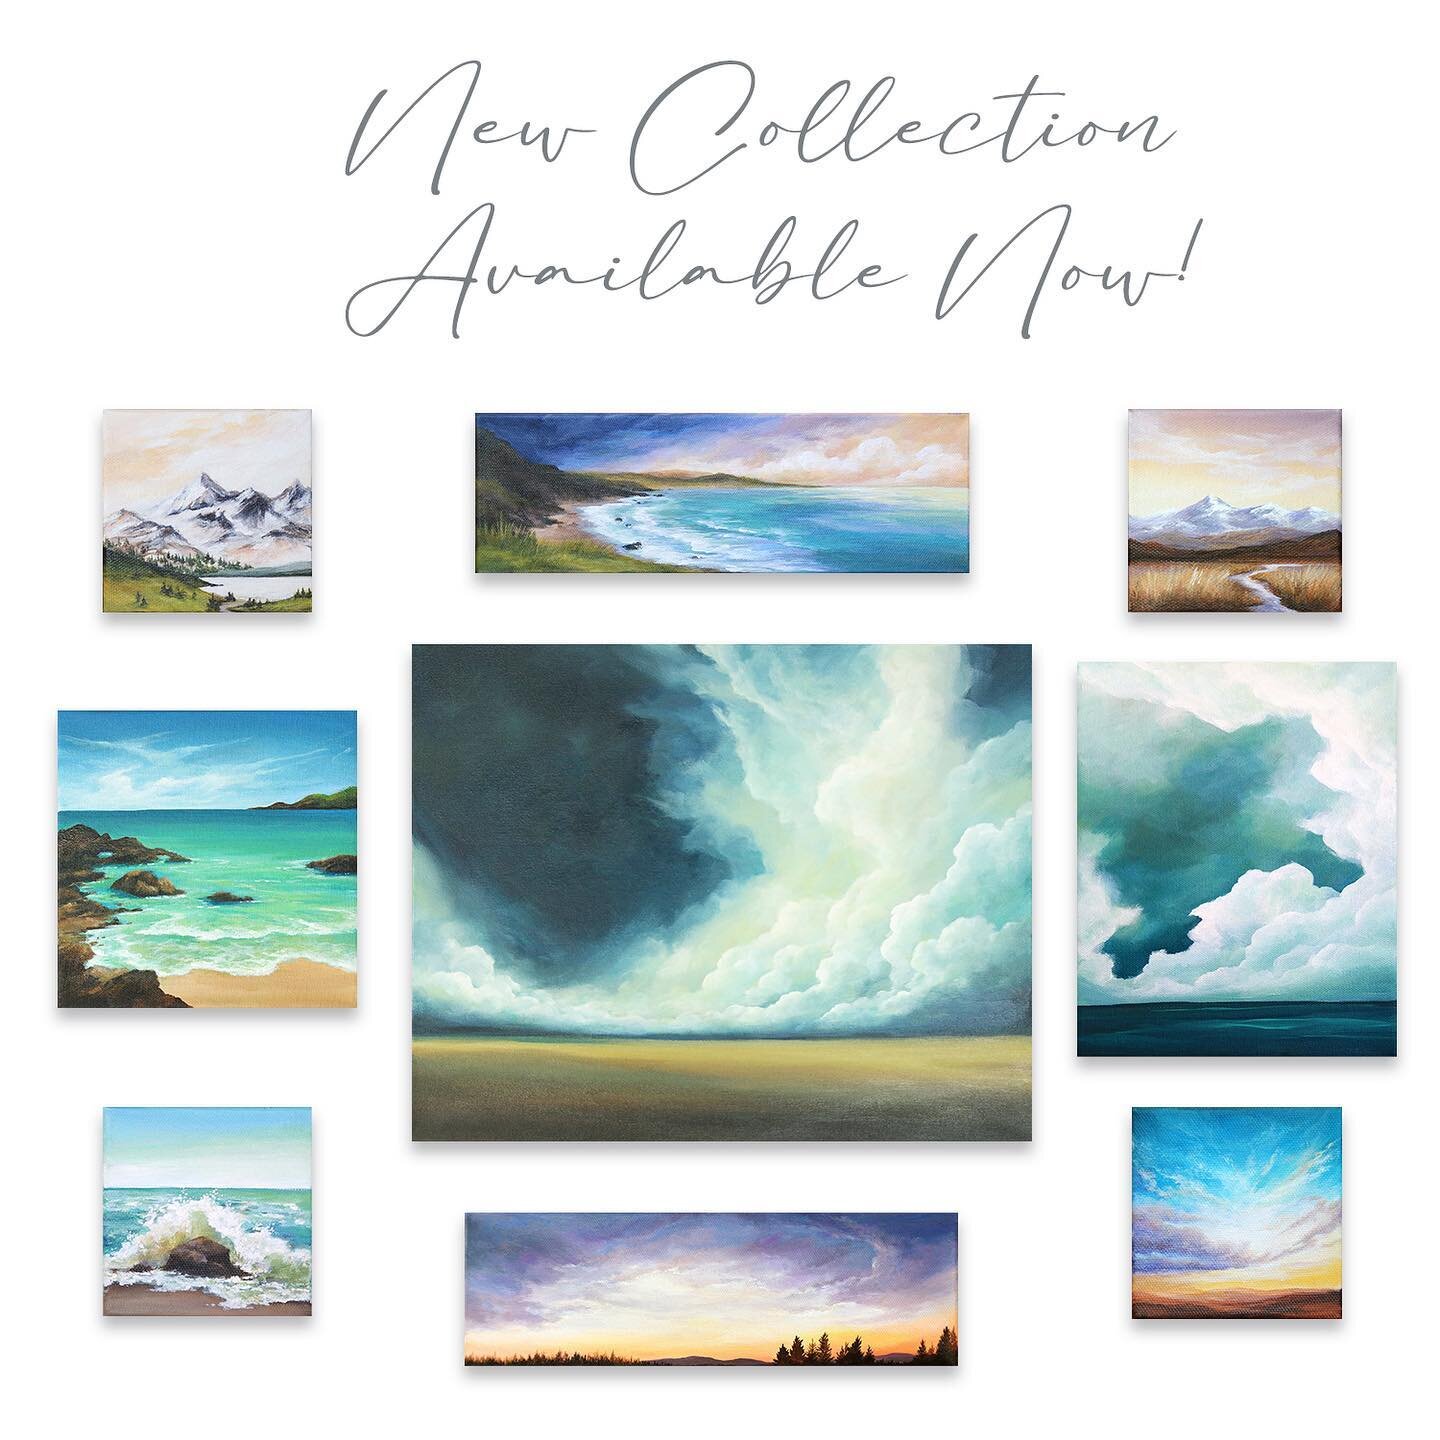 At long last, my spring collection is available on my website!  Because I have the attention span of a squirrel, this collection is very eclectic with a fun mix of tropical seascapes, warm neutrals and some ka-pow dramatic cloudscapes.  Follow the li